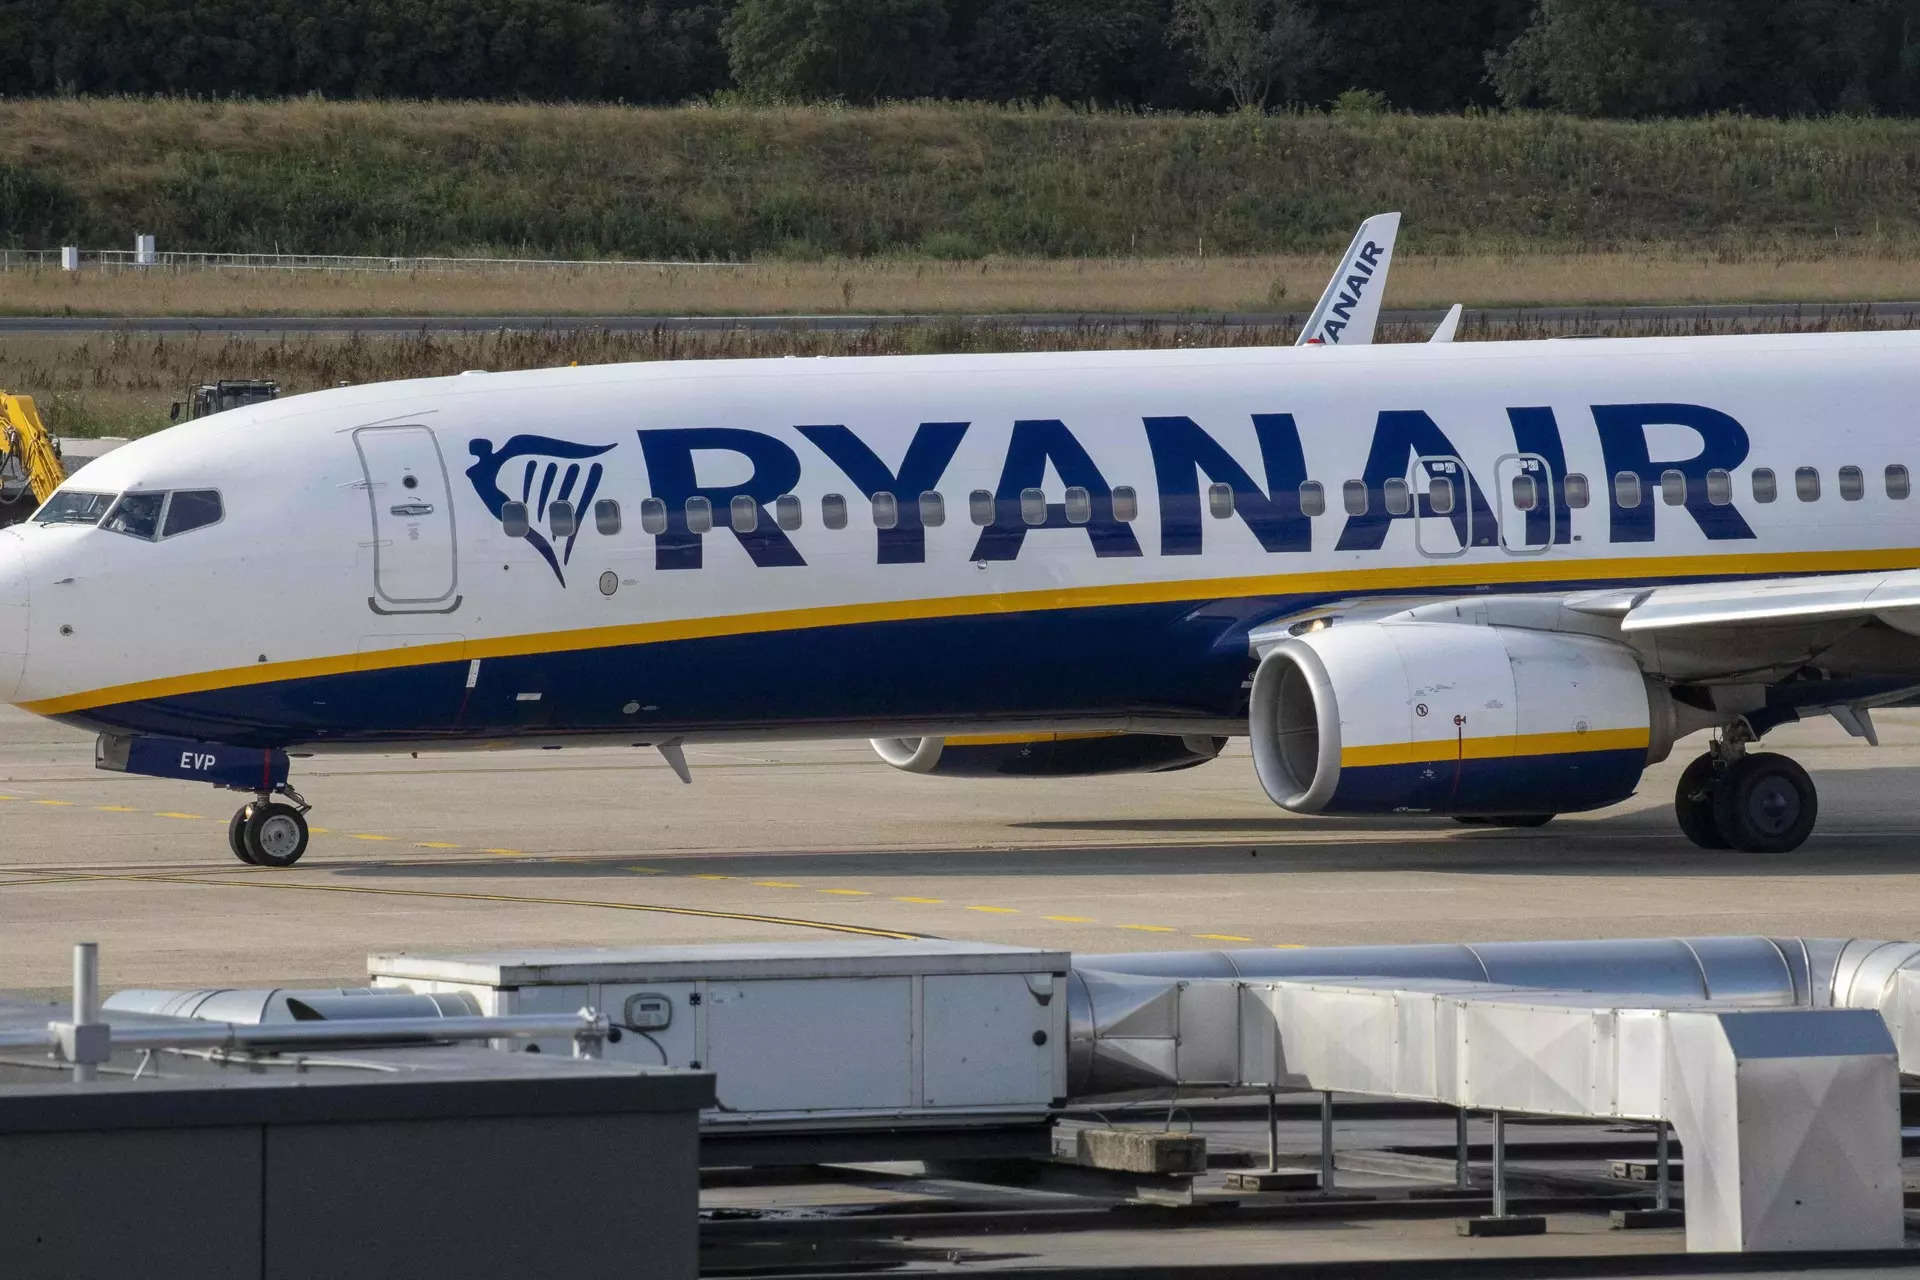 <p>A Ryanair airplane is seen on the tarmac of Charleroi Airport, during a second weekend strike of pilots of the airline, in Charleroi on July 29, 2023. A strike by Ryanair pilots in Belgium in an ongoing dispute over working conditions has cancelled 96 flights to and from Charleroi this weekend, the airport said on July 29, in the midst of the busy summer travel season. - Belgium OUT</p><p> (Photo by NICOLAS MAETERLINCK / BELGA / AFP)</p>